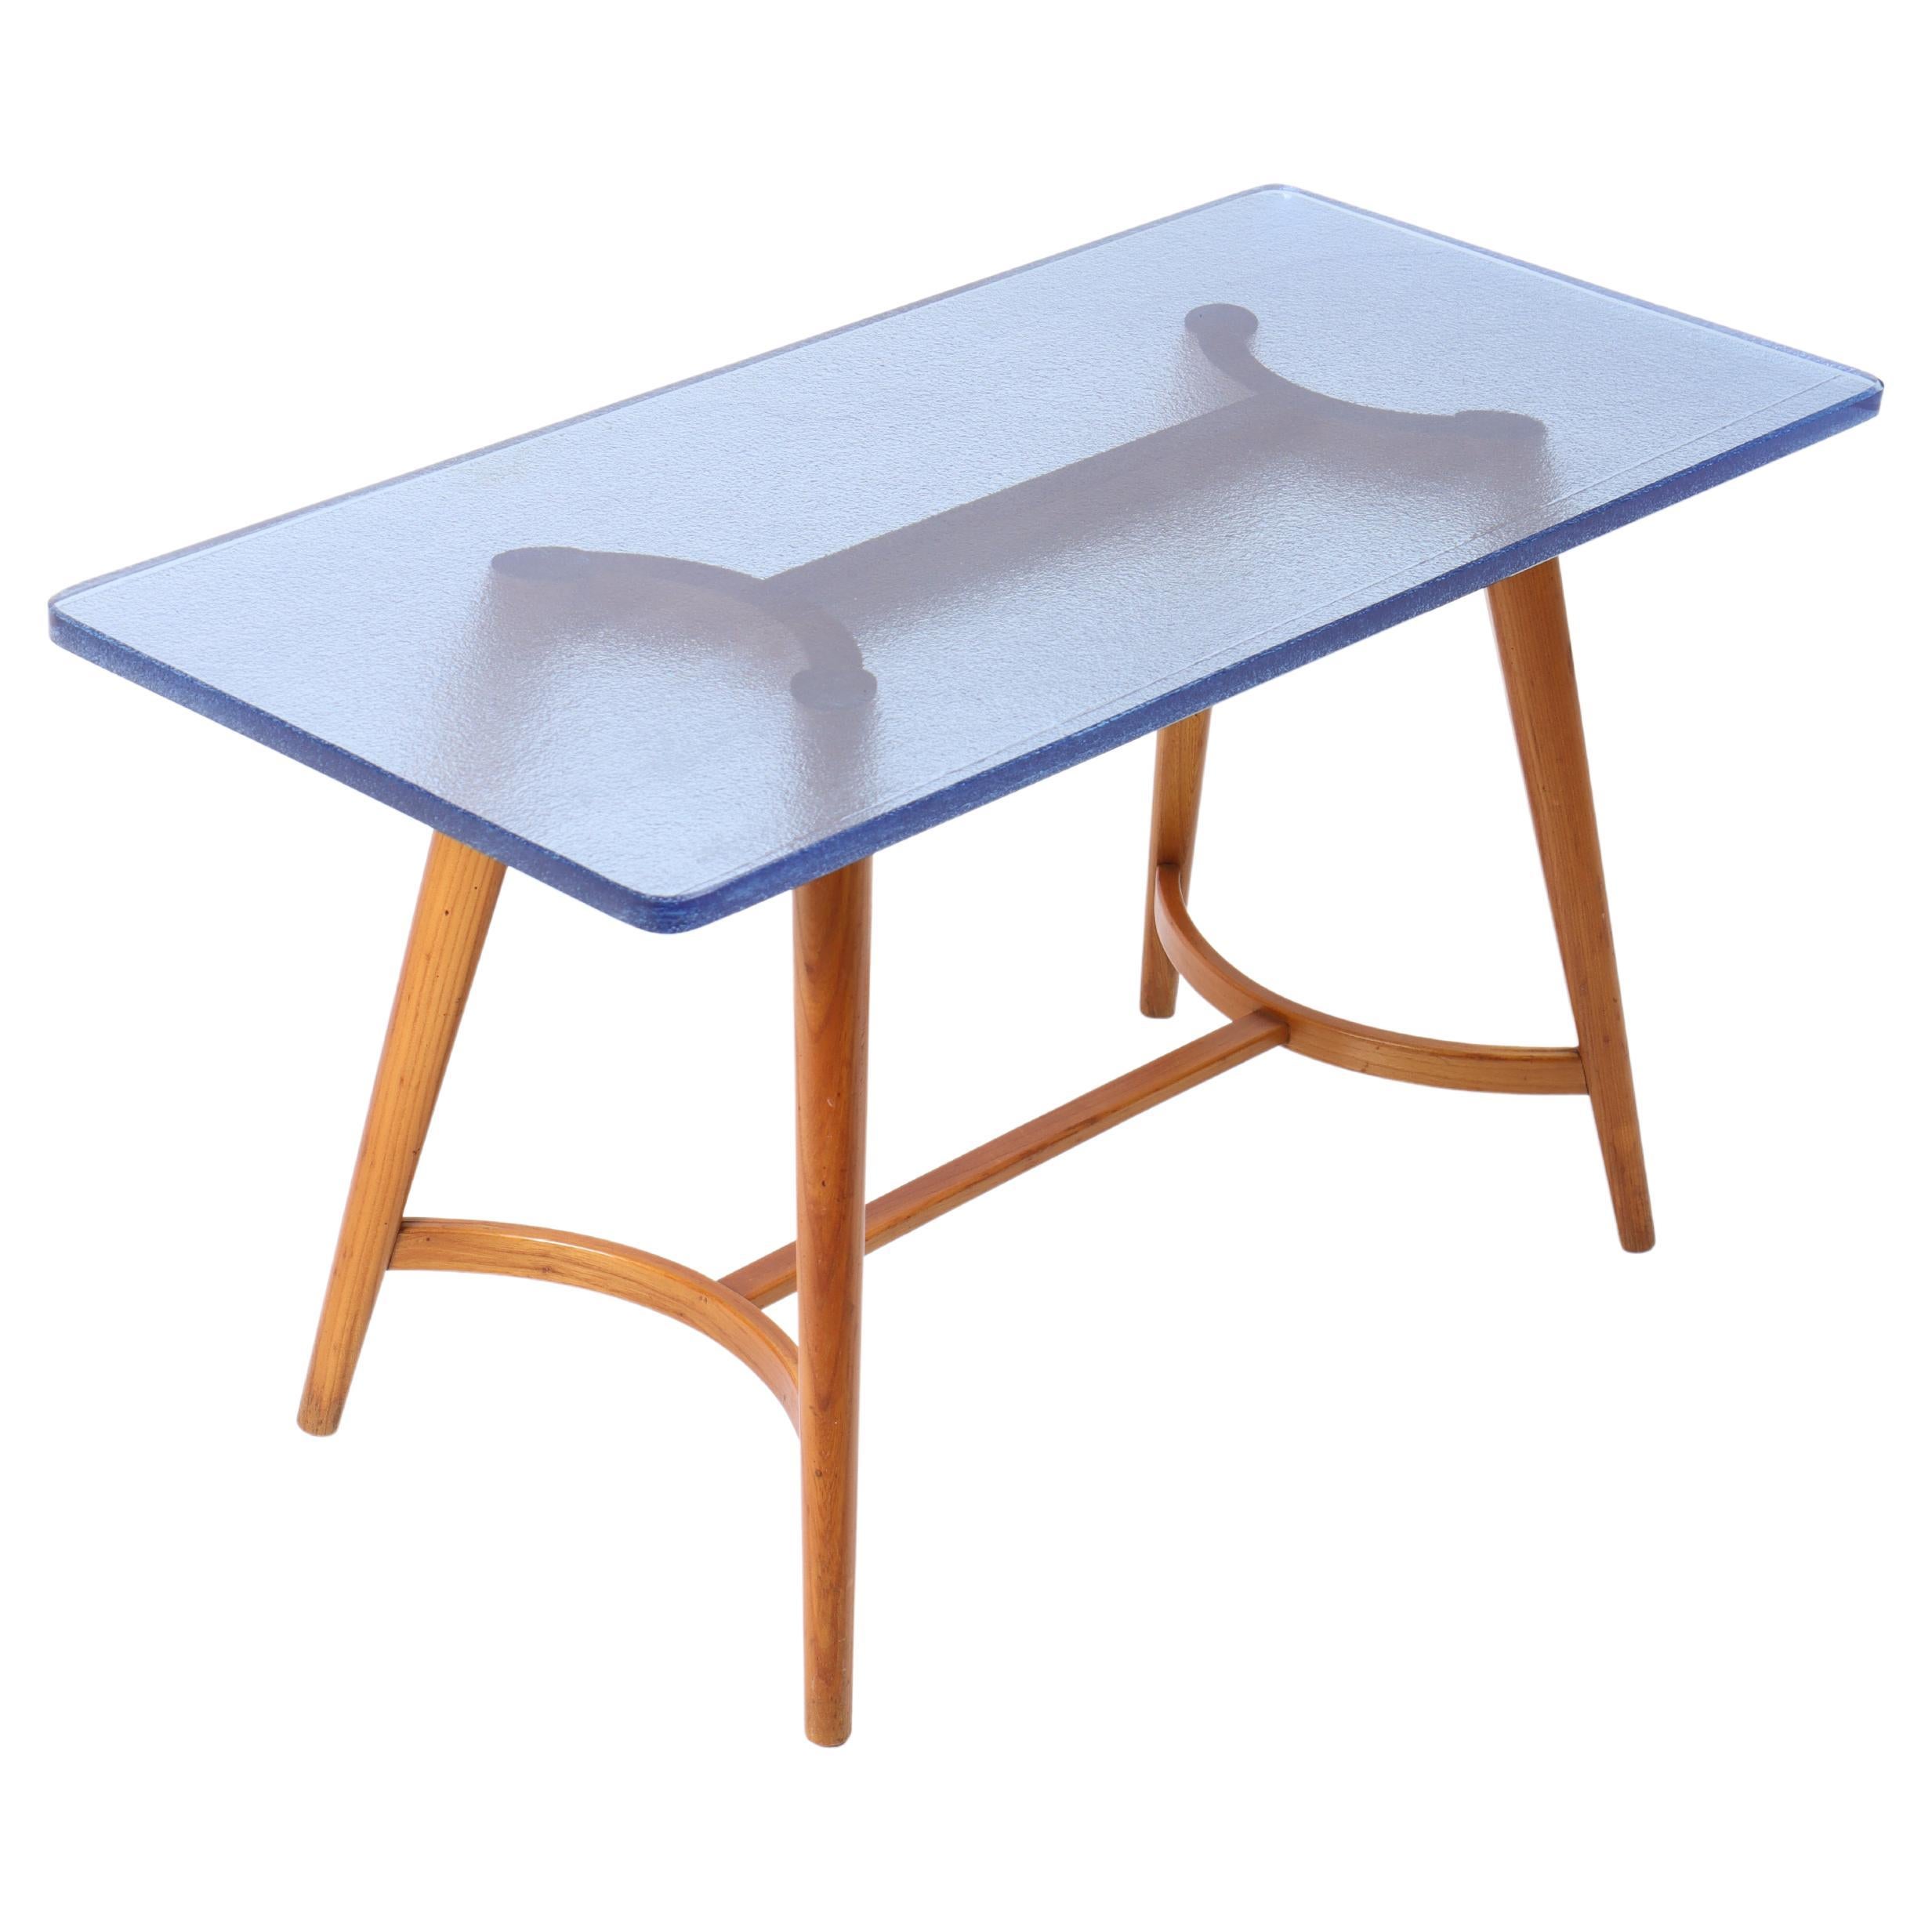 Midcentury Low Table in Glass and Elm, Made in Denmark, 1950s